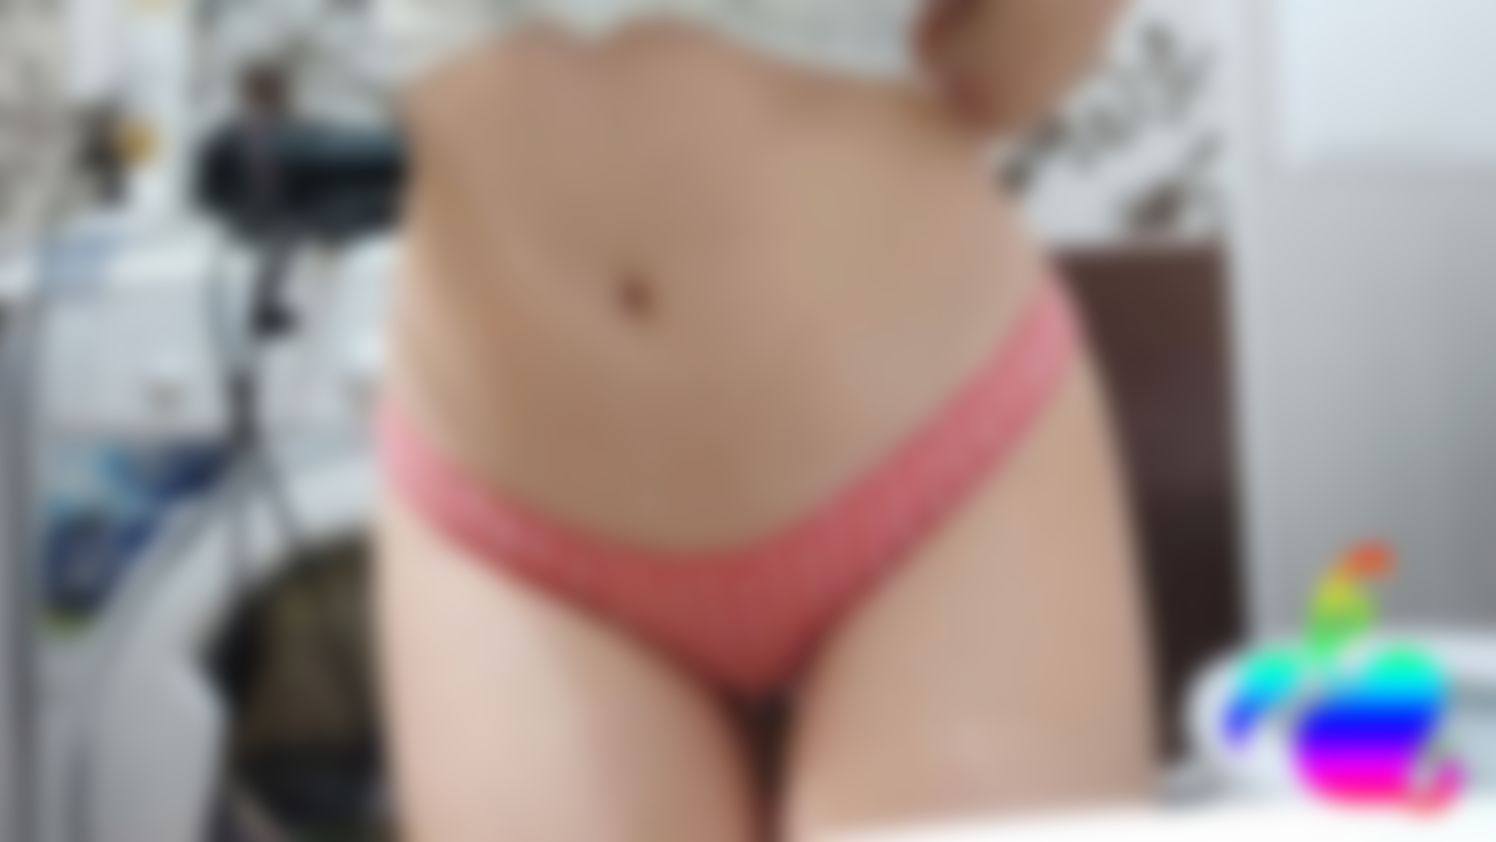 sweetleka : I love to play with my wet pussy!!!! Come to cum with me😽😘 😋